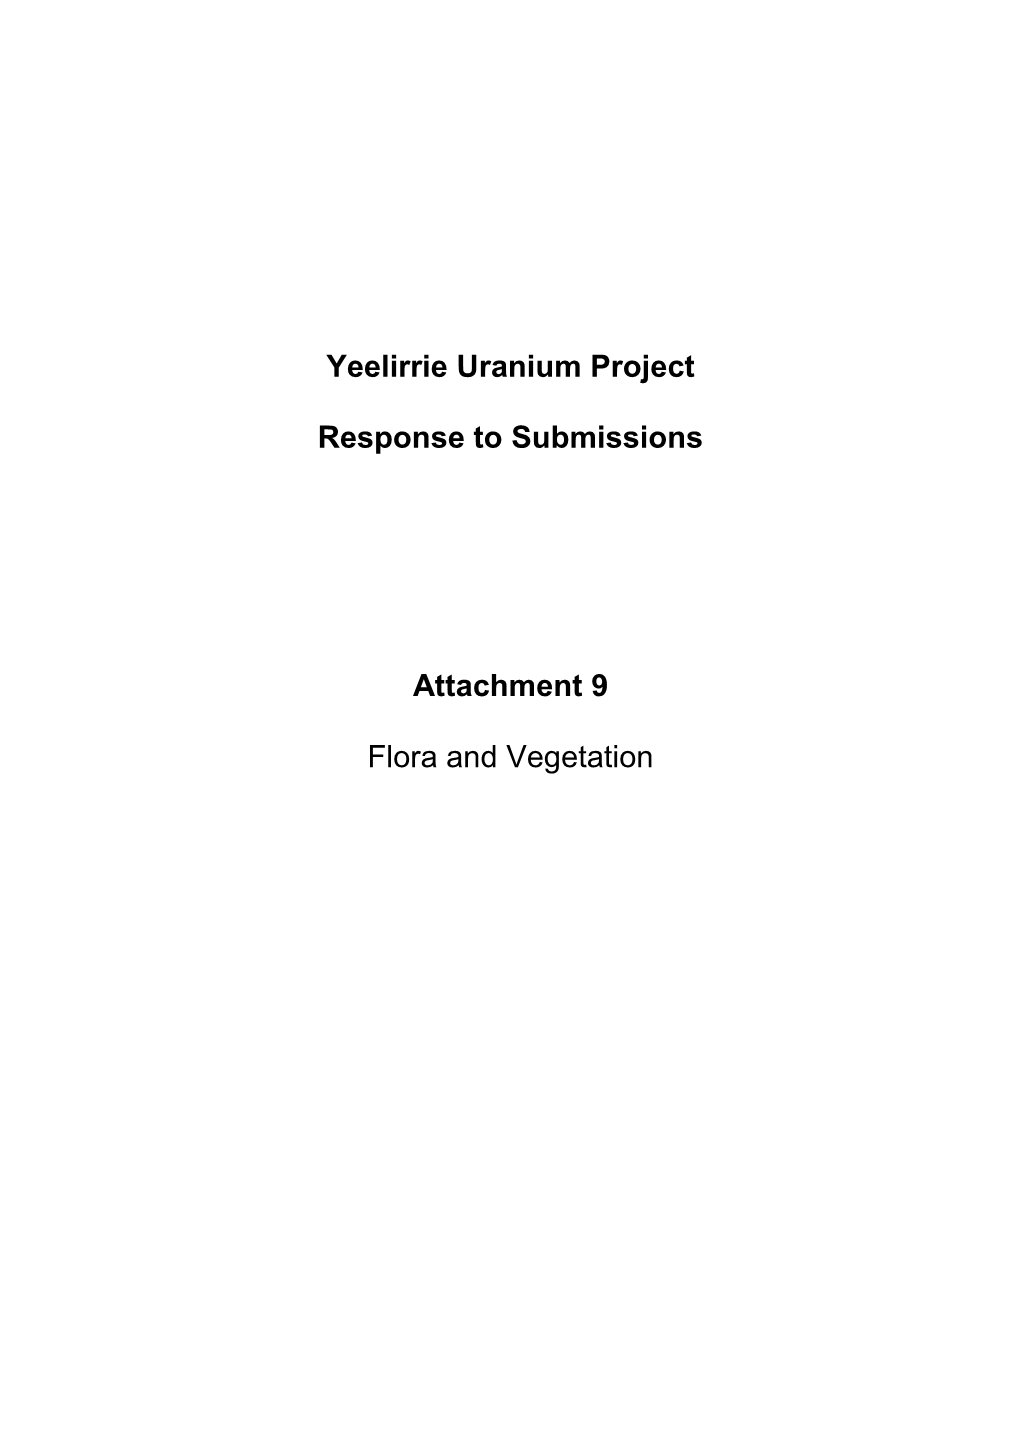 Yeelirrie Uranium Project Response to Submissions Attachment 9 Flora